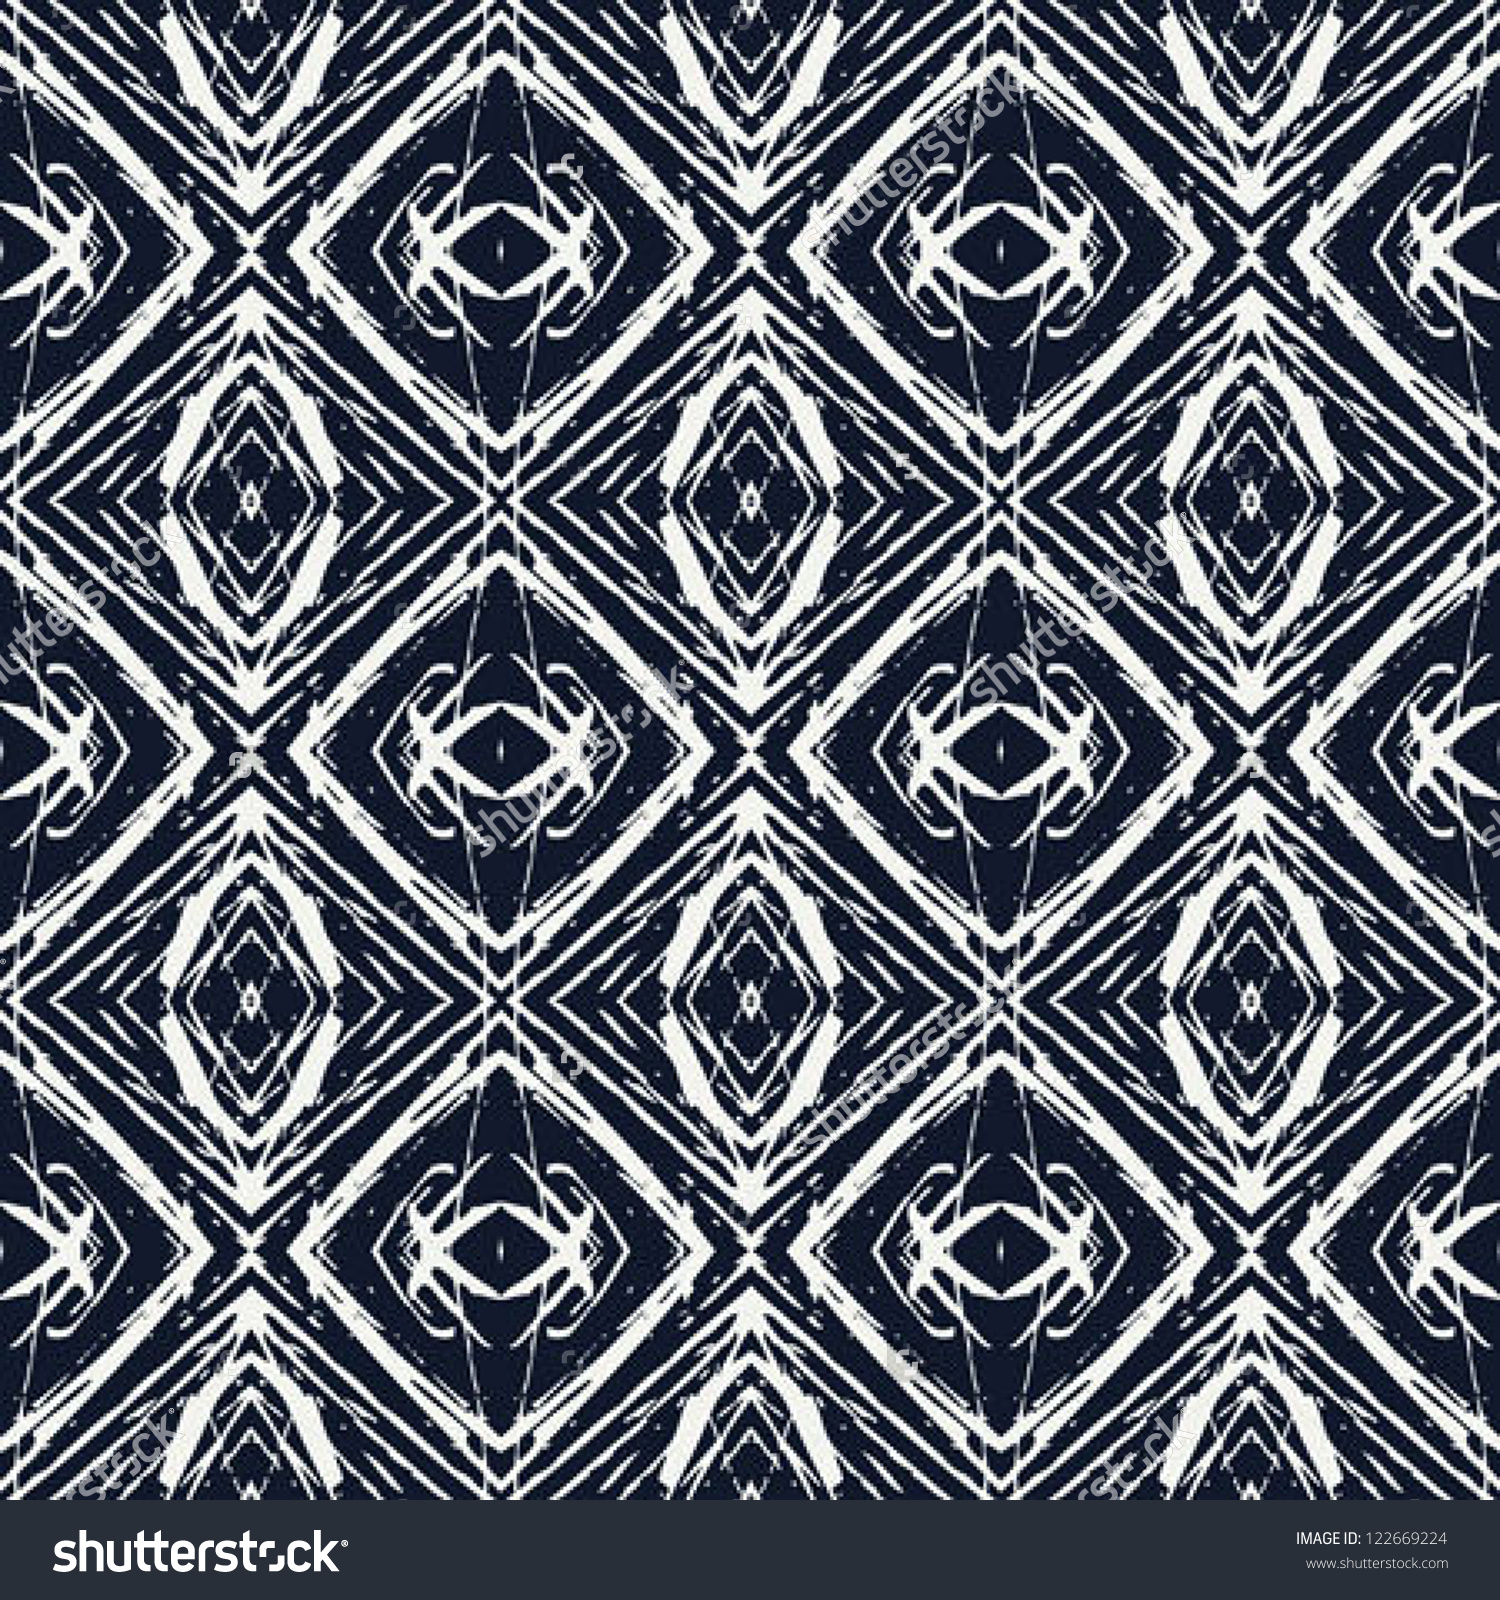 All 97+ Images geometric navy blue and white wallpaper Updated